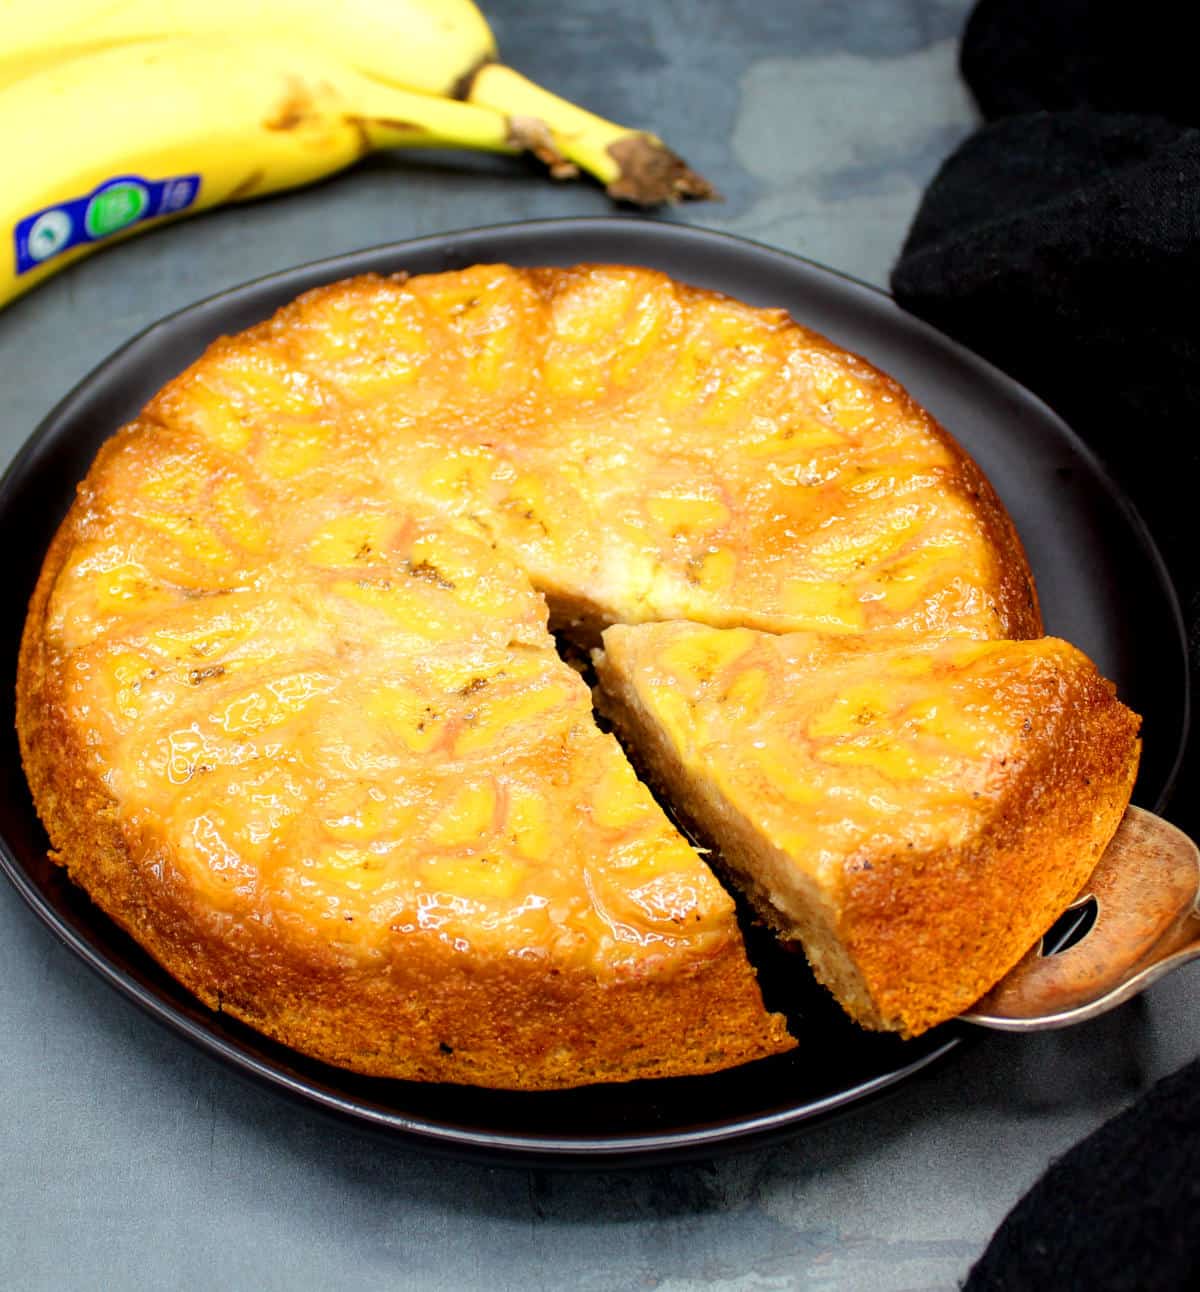 A slice of the banana upside down cake being lifted off with a serving spoon.